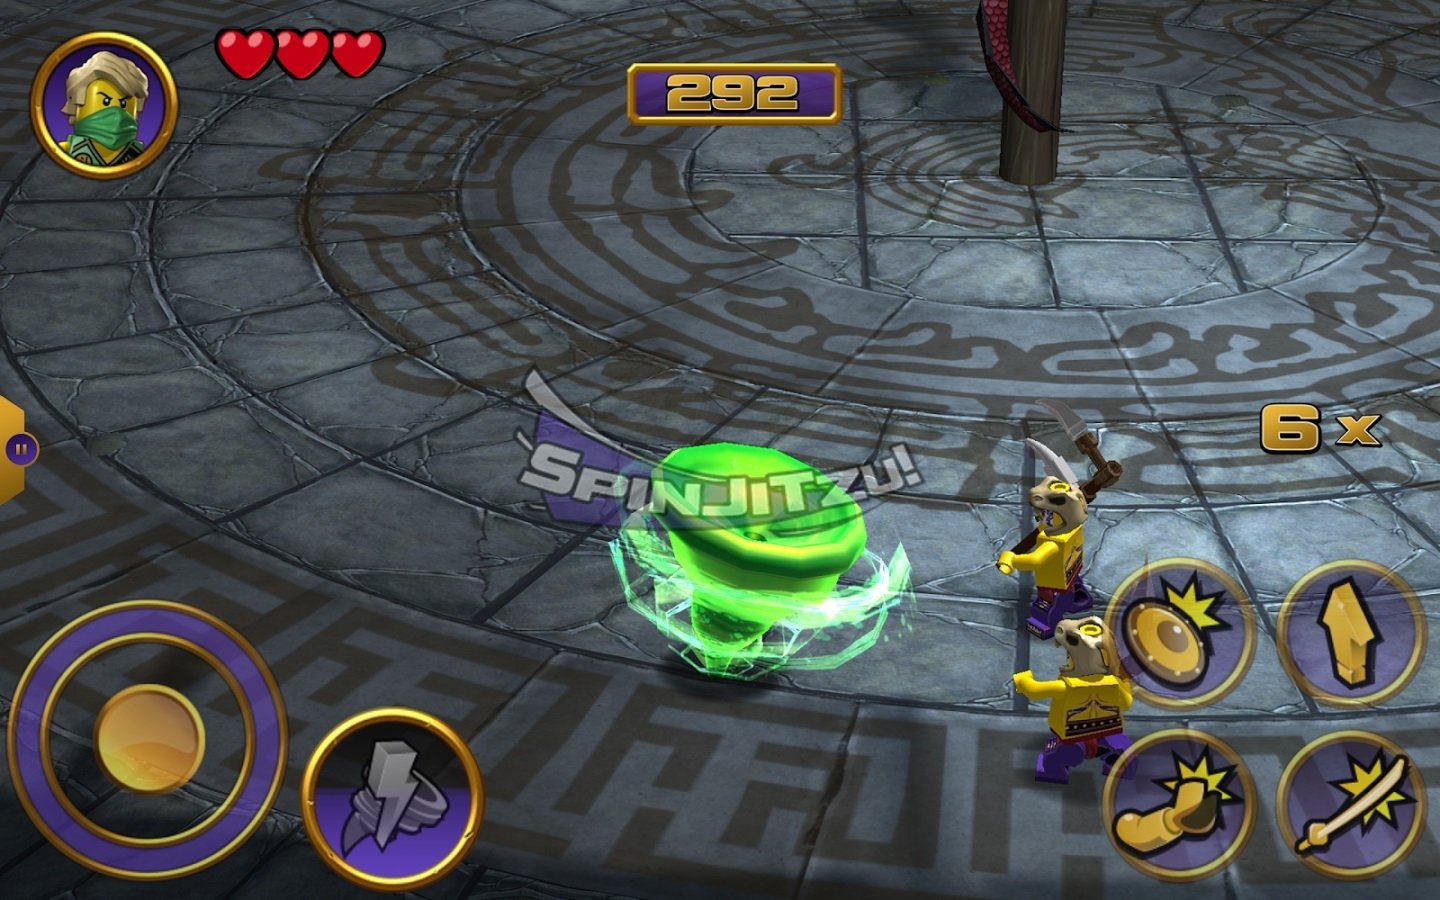 LEGO Ninjago Tournament 1.05.2.970 - Download For Android APK Free